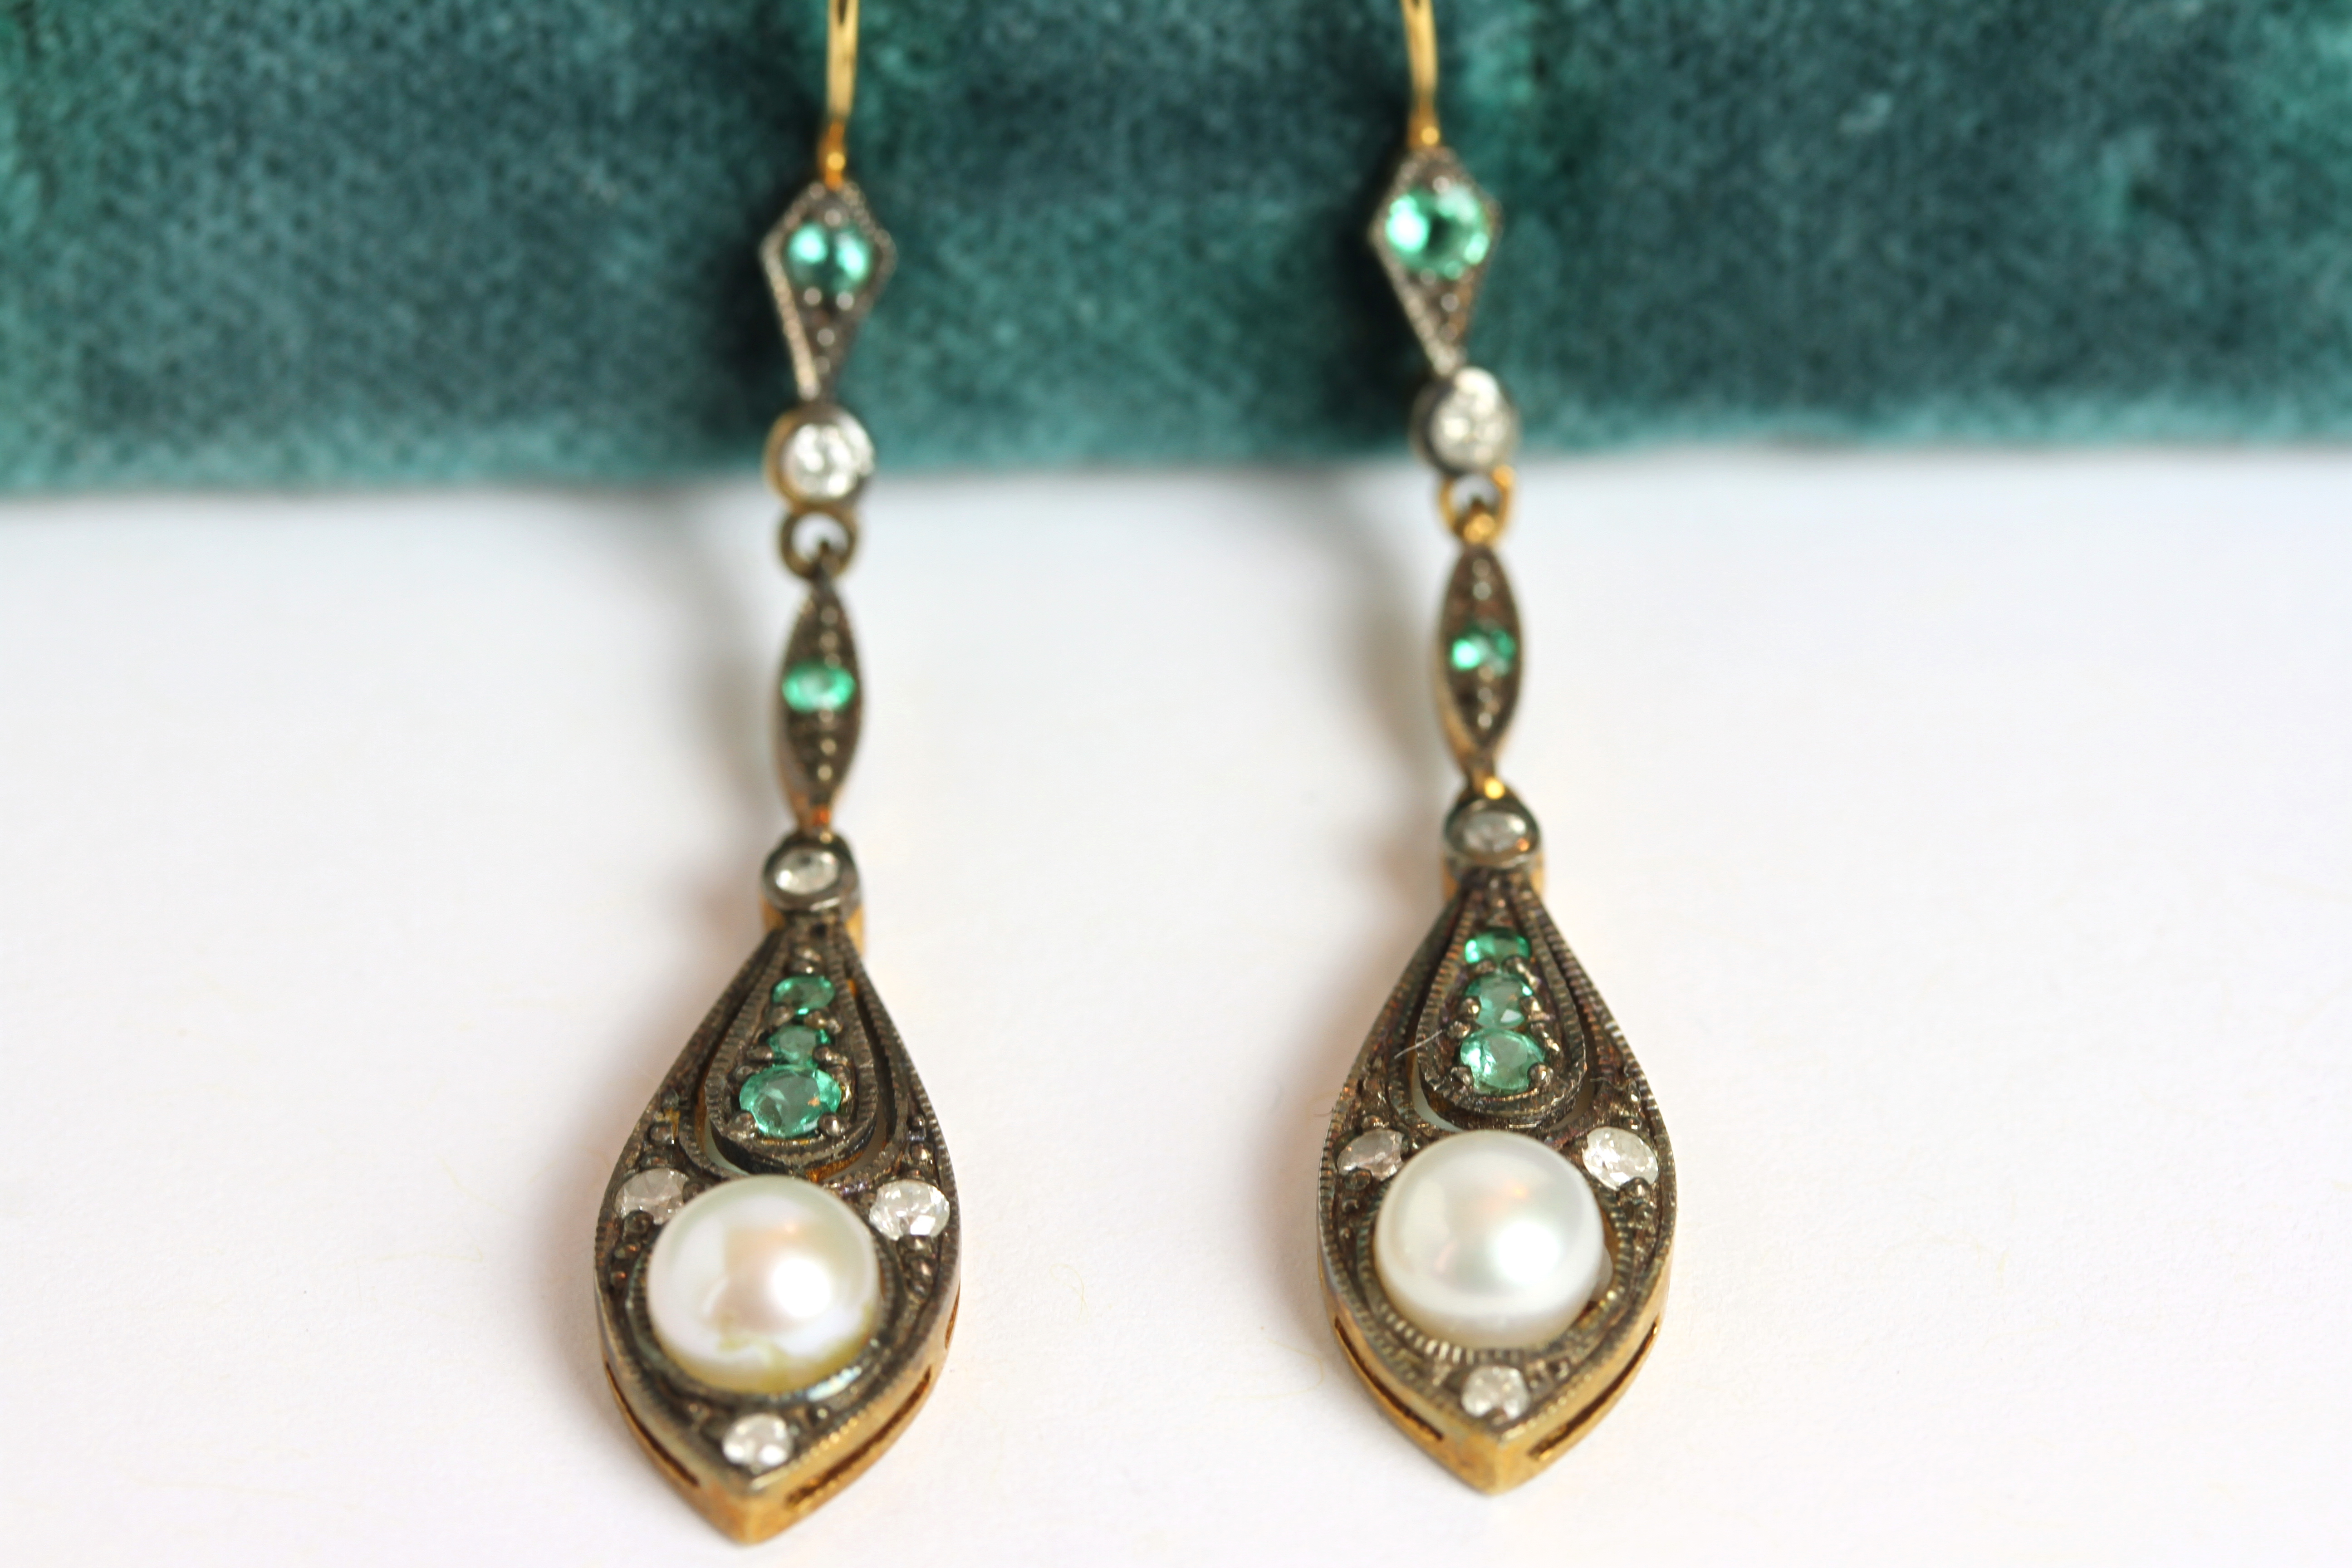 Pair of Diamond, Emerald & Pearl drop earrings, each set with one pearl, 5 diamonds and 5 - Image 2 of 2